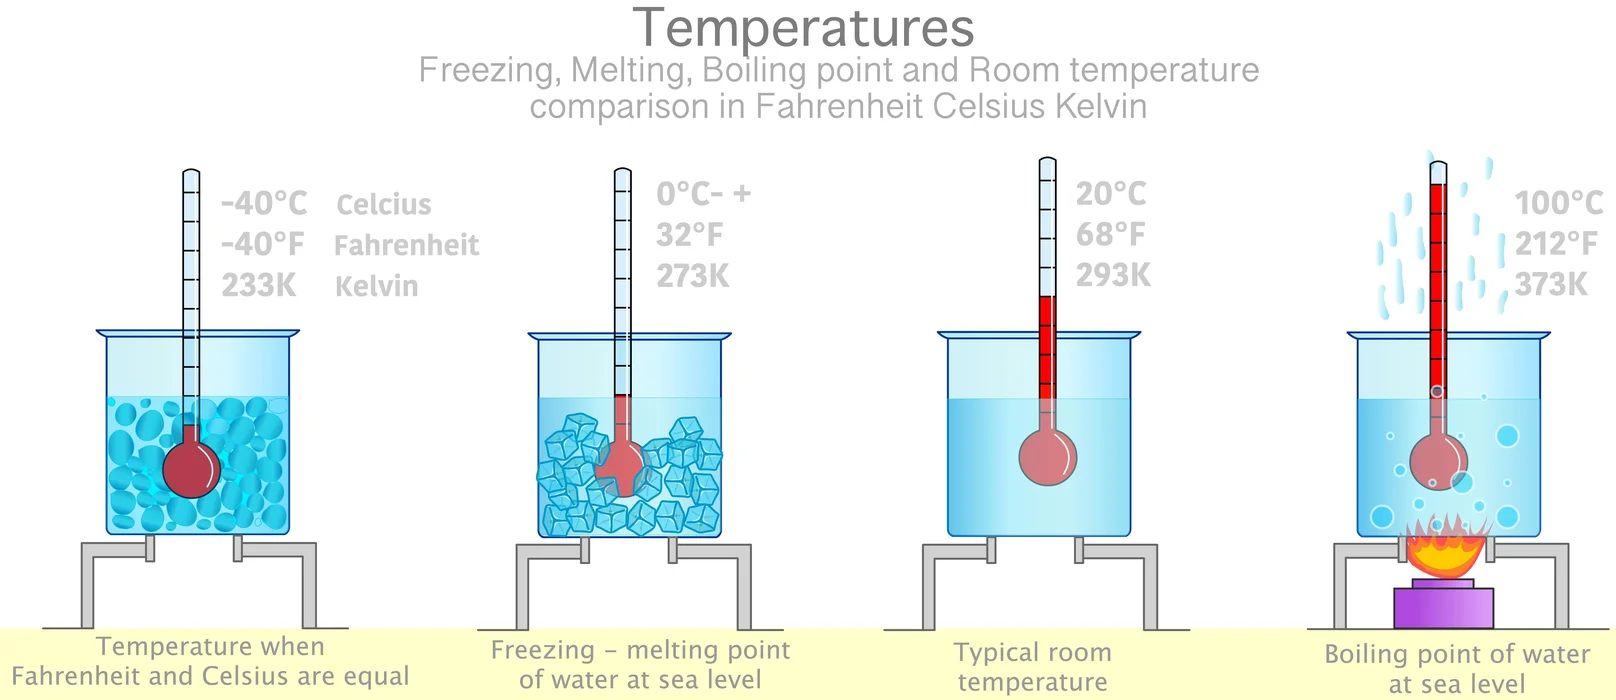 What Is the Boiling Point of Water?